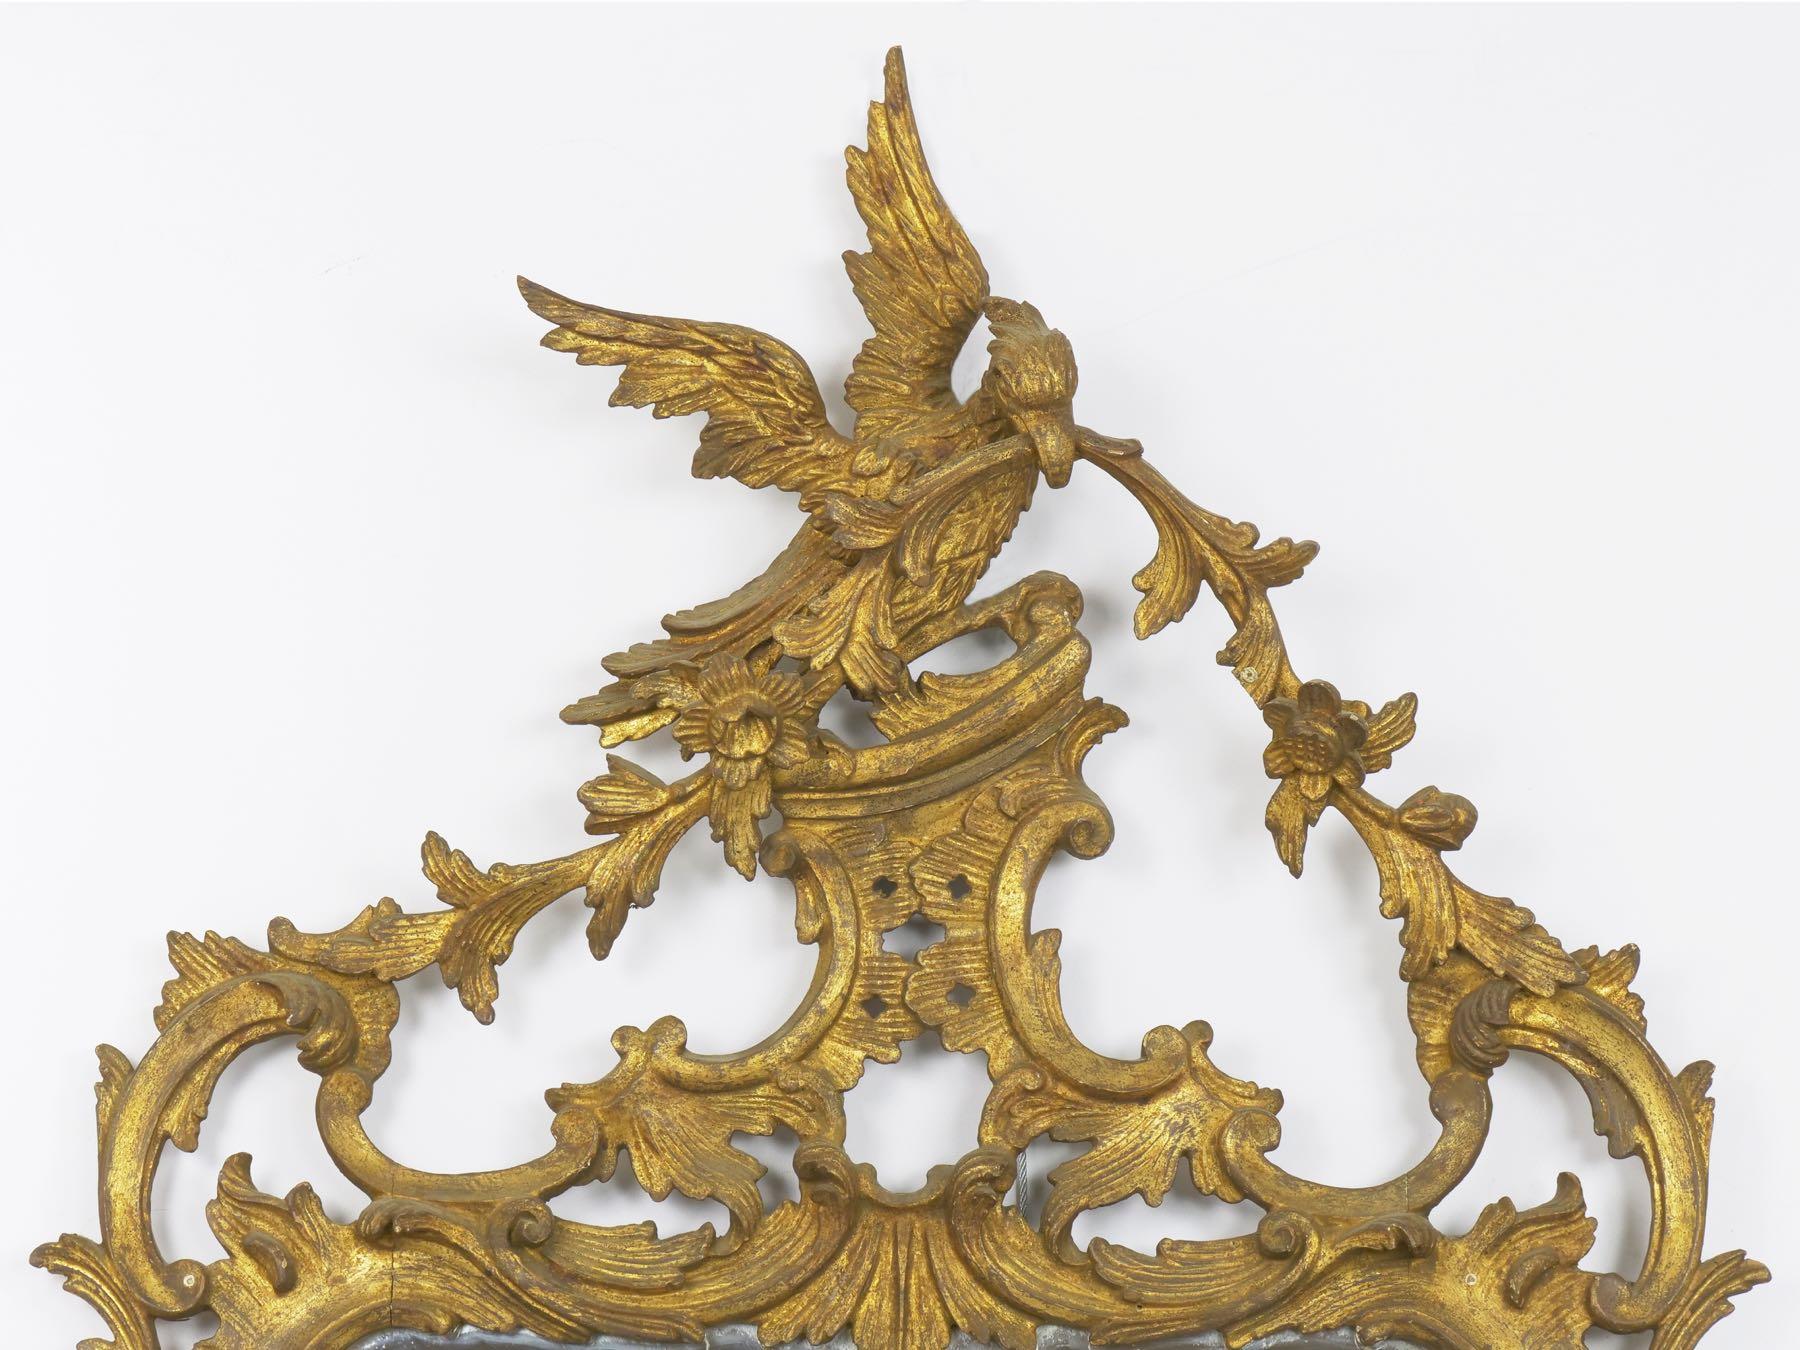 A most charming antique pier mirror, the oversized and beautifully hand carved phoenix cartouche is notable. Raised over a rocaille structure of opposing C-scrolls, the Phoenix holds a sprig of foliage in its beak, the vine proceeding to drape down